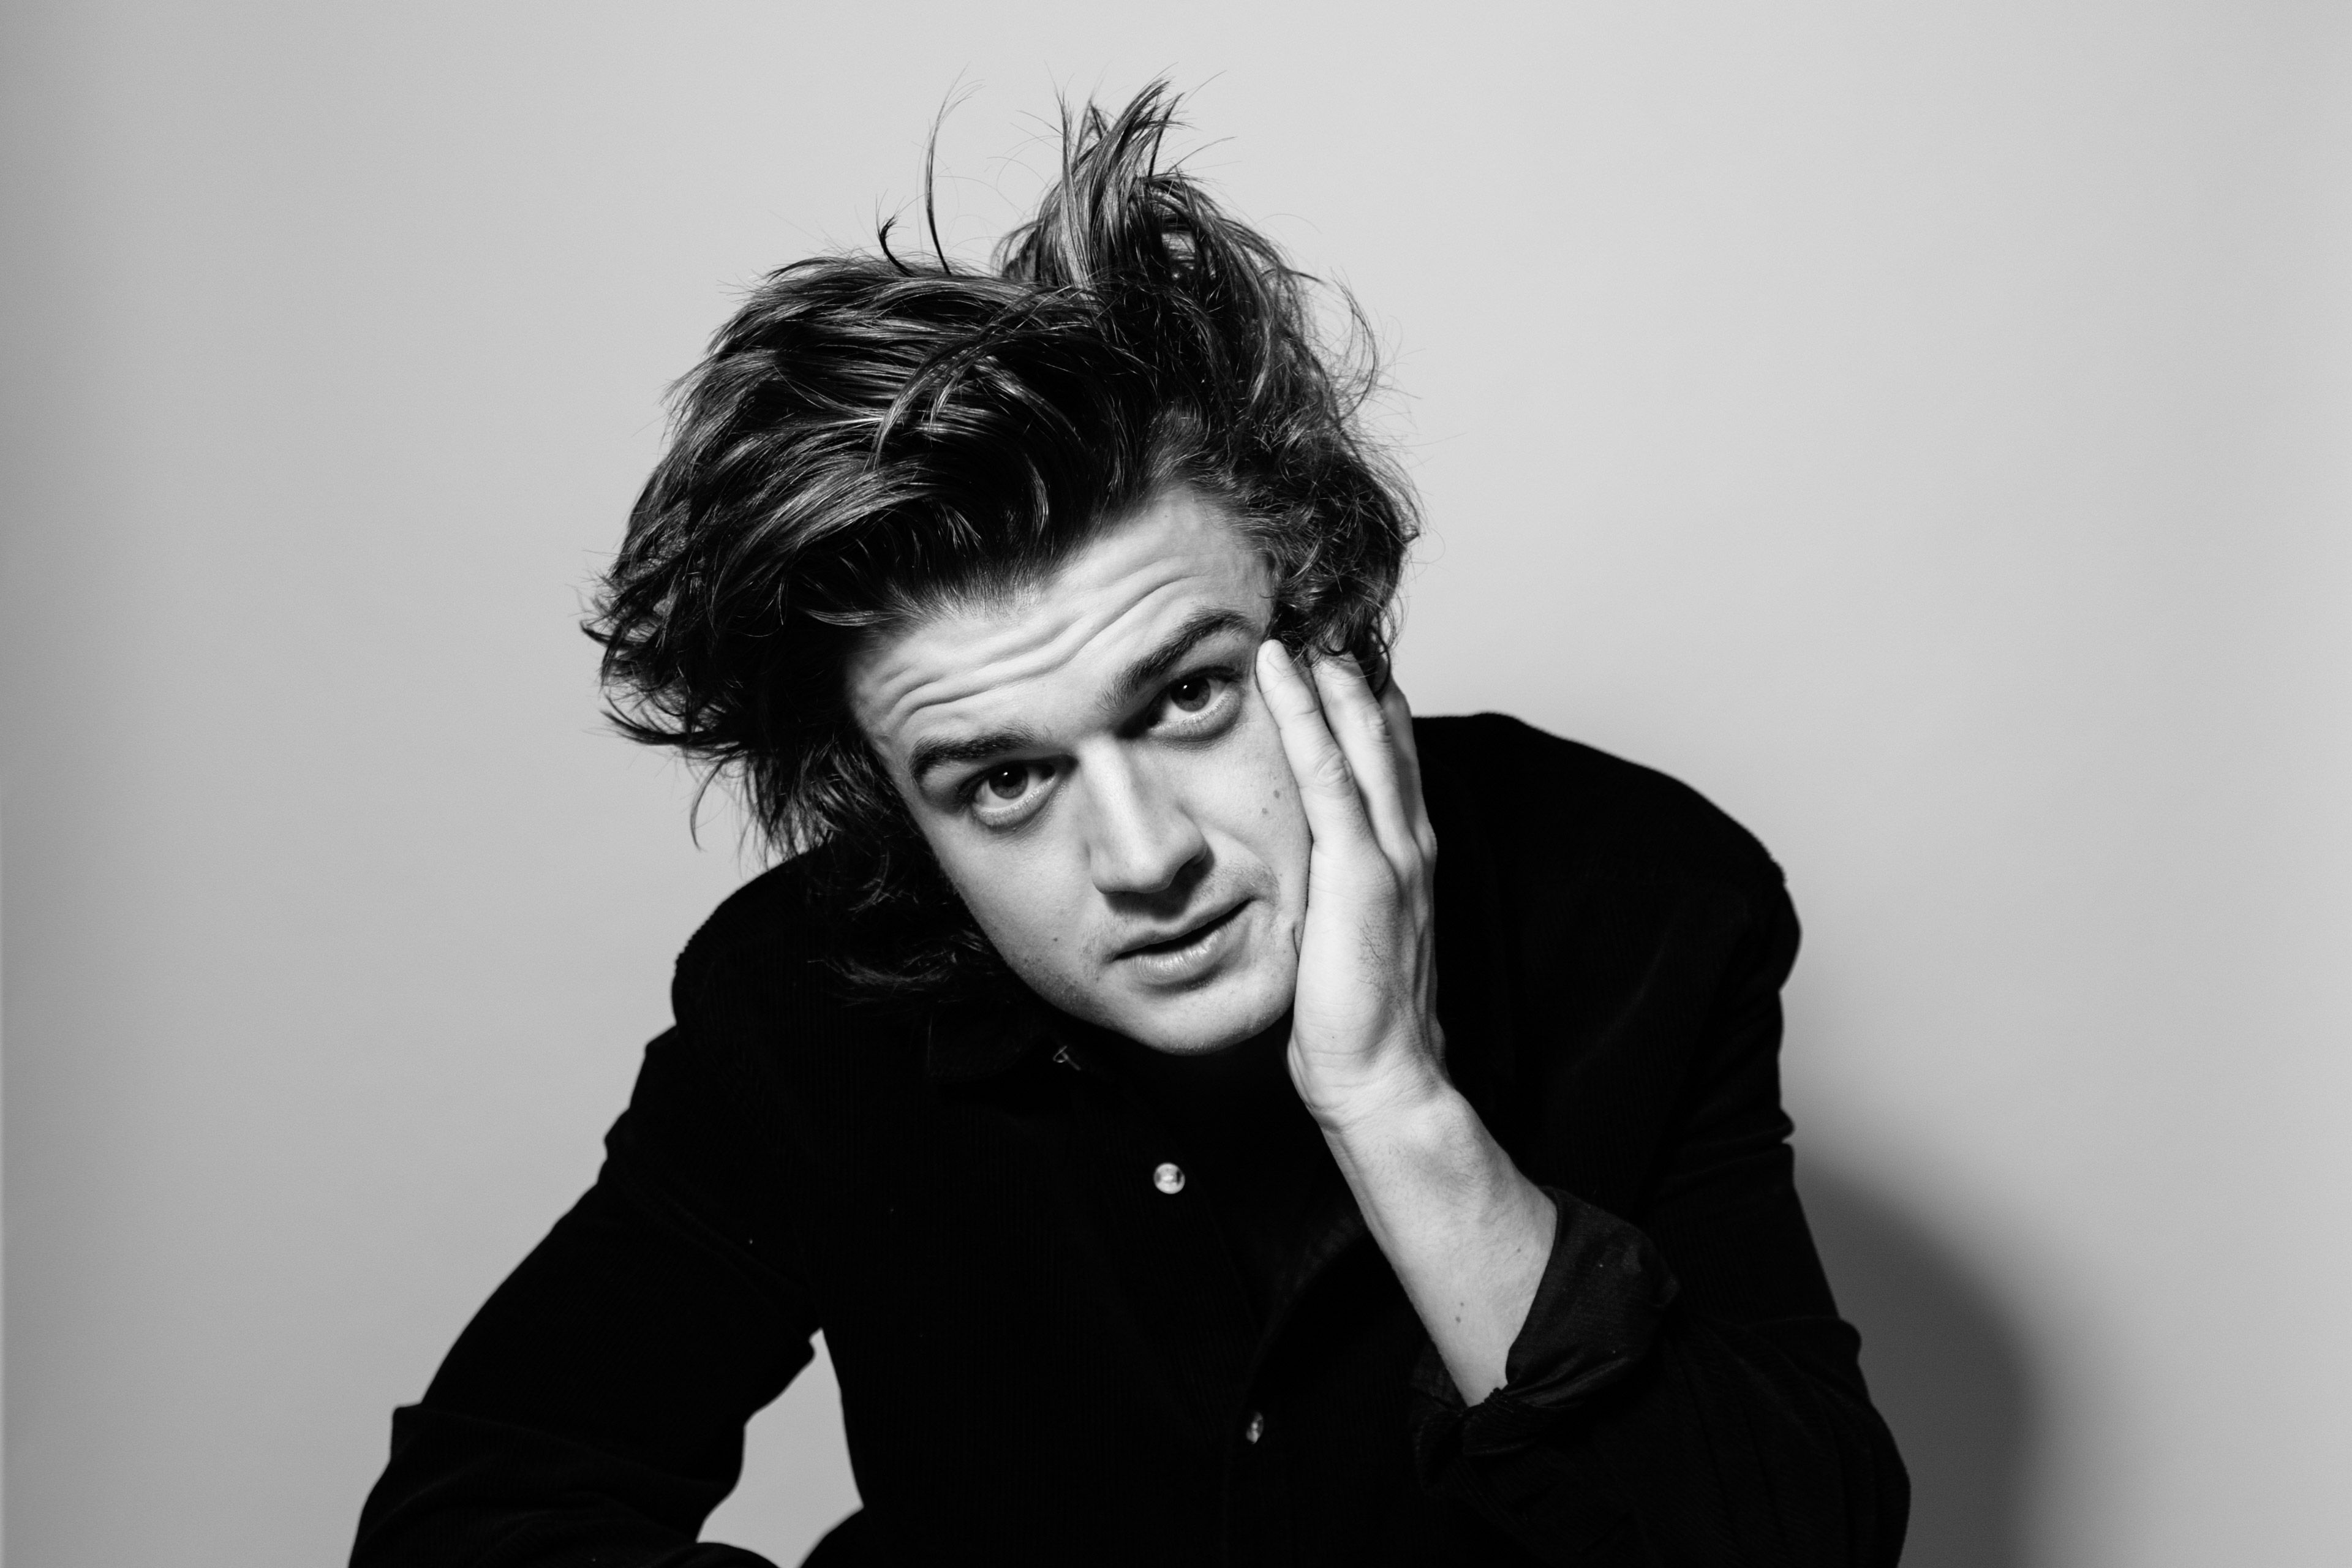 3840x2560 Joe Keery As Steve Harrington Stranger Things 1280x1024 Resolution Hd 4k Wallpaper Image Background Photo And Picture